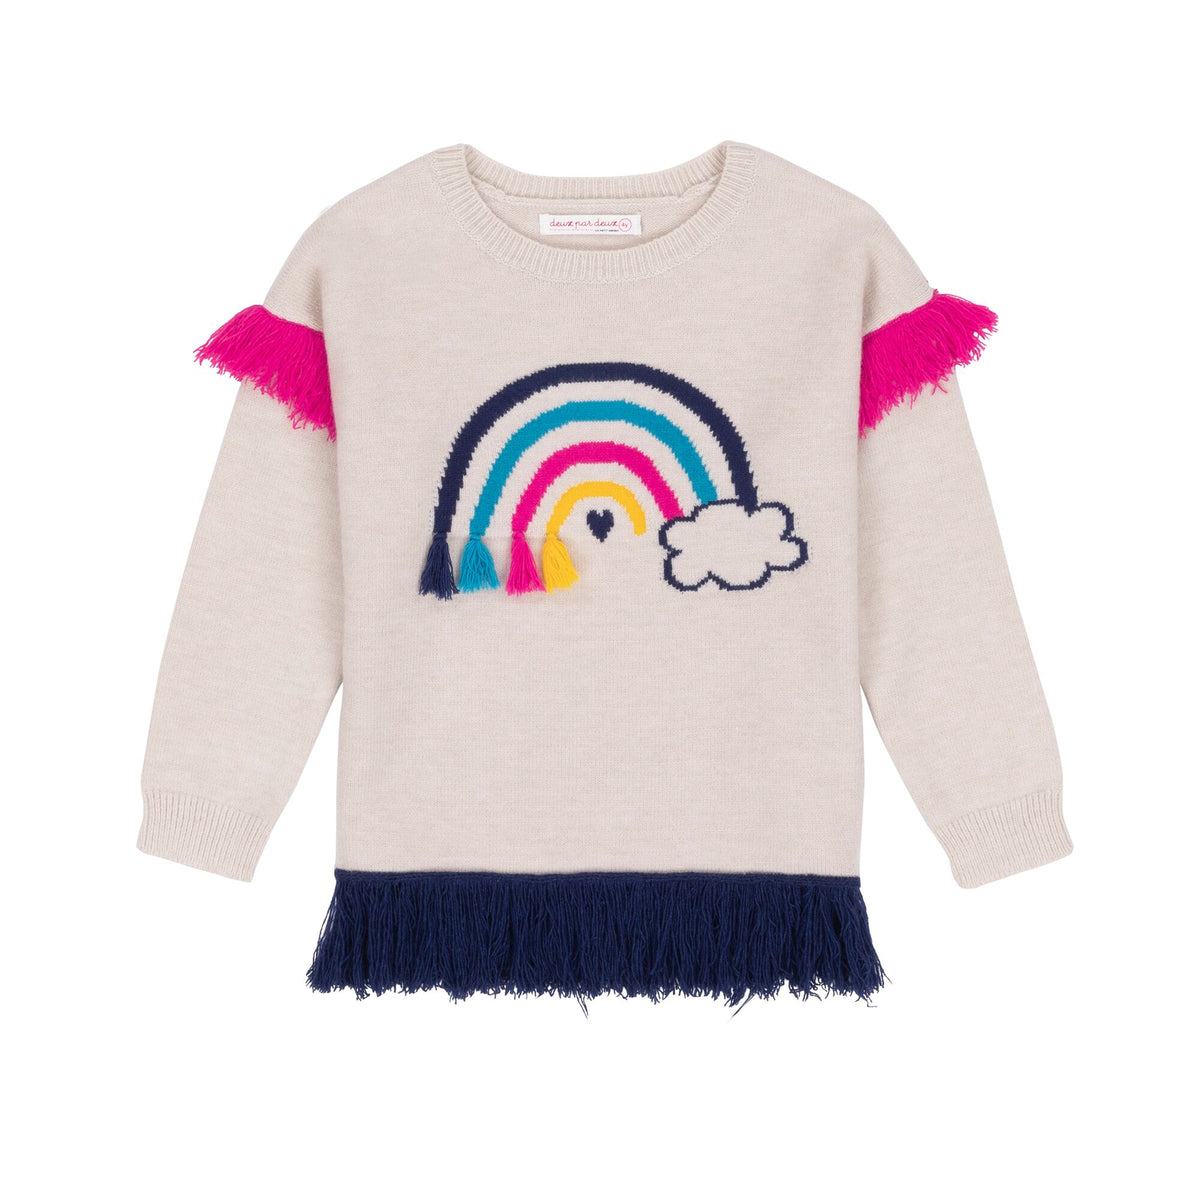 Girls Knitted Rainbow Sweater Top